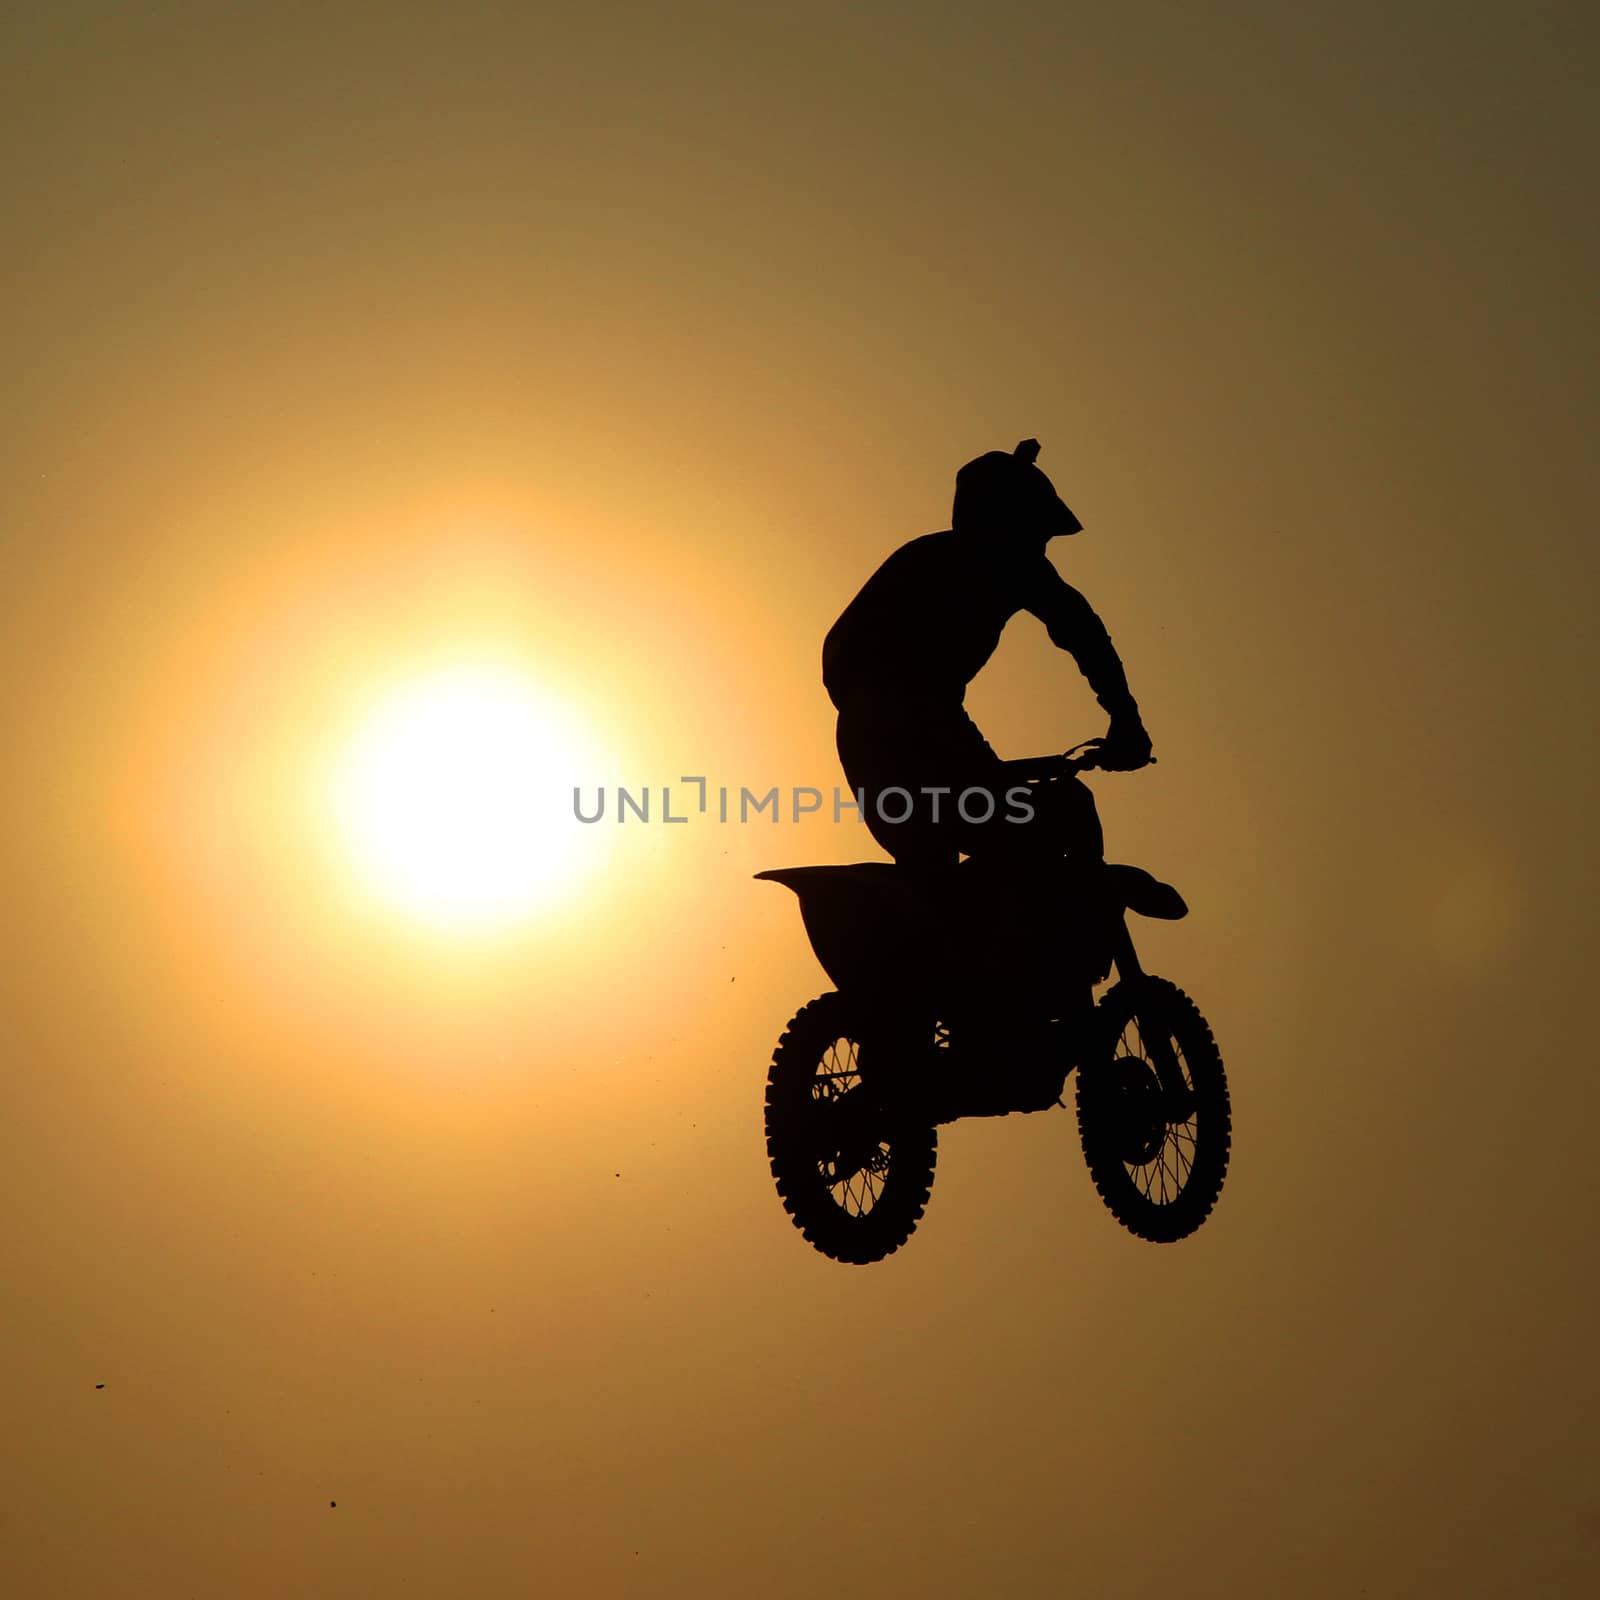 Motorcycle jumps in the air by liewluck